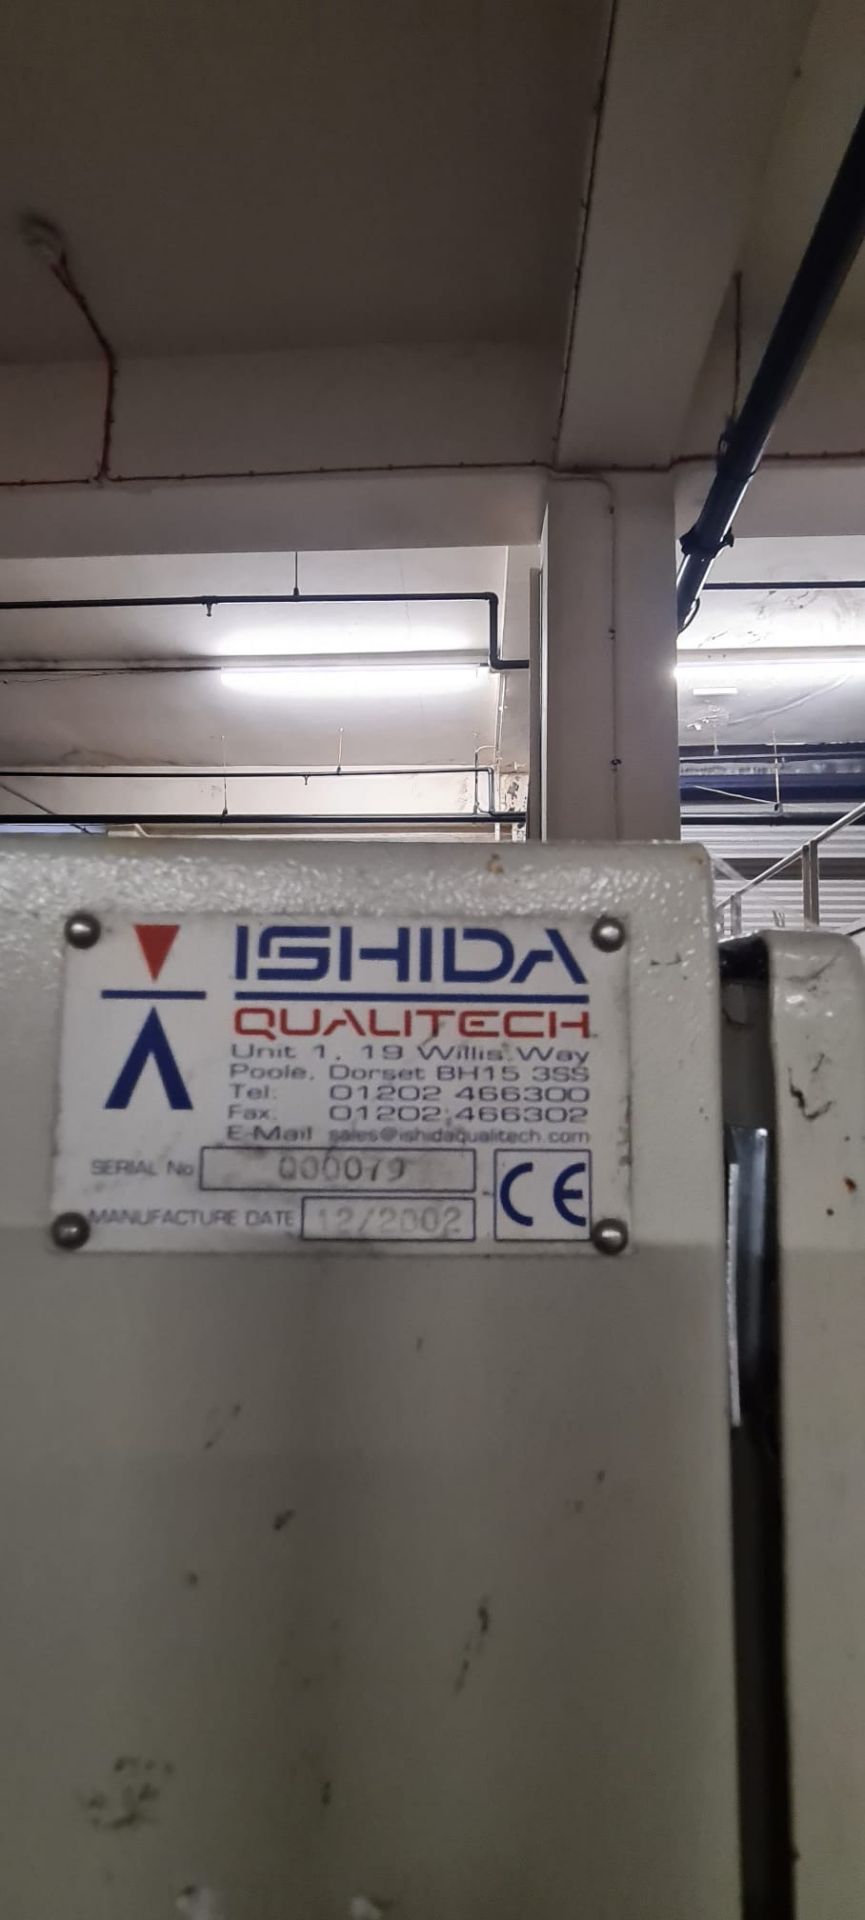 Ishida Qualitech 4 Head Labeller, serial no. 000079, year of manufacture 2002, machine dimensions - Image 4 of 5